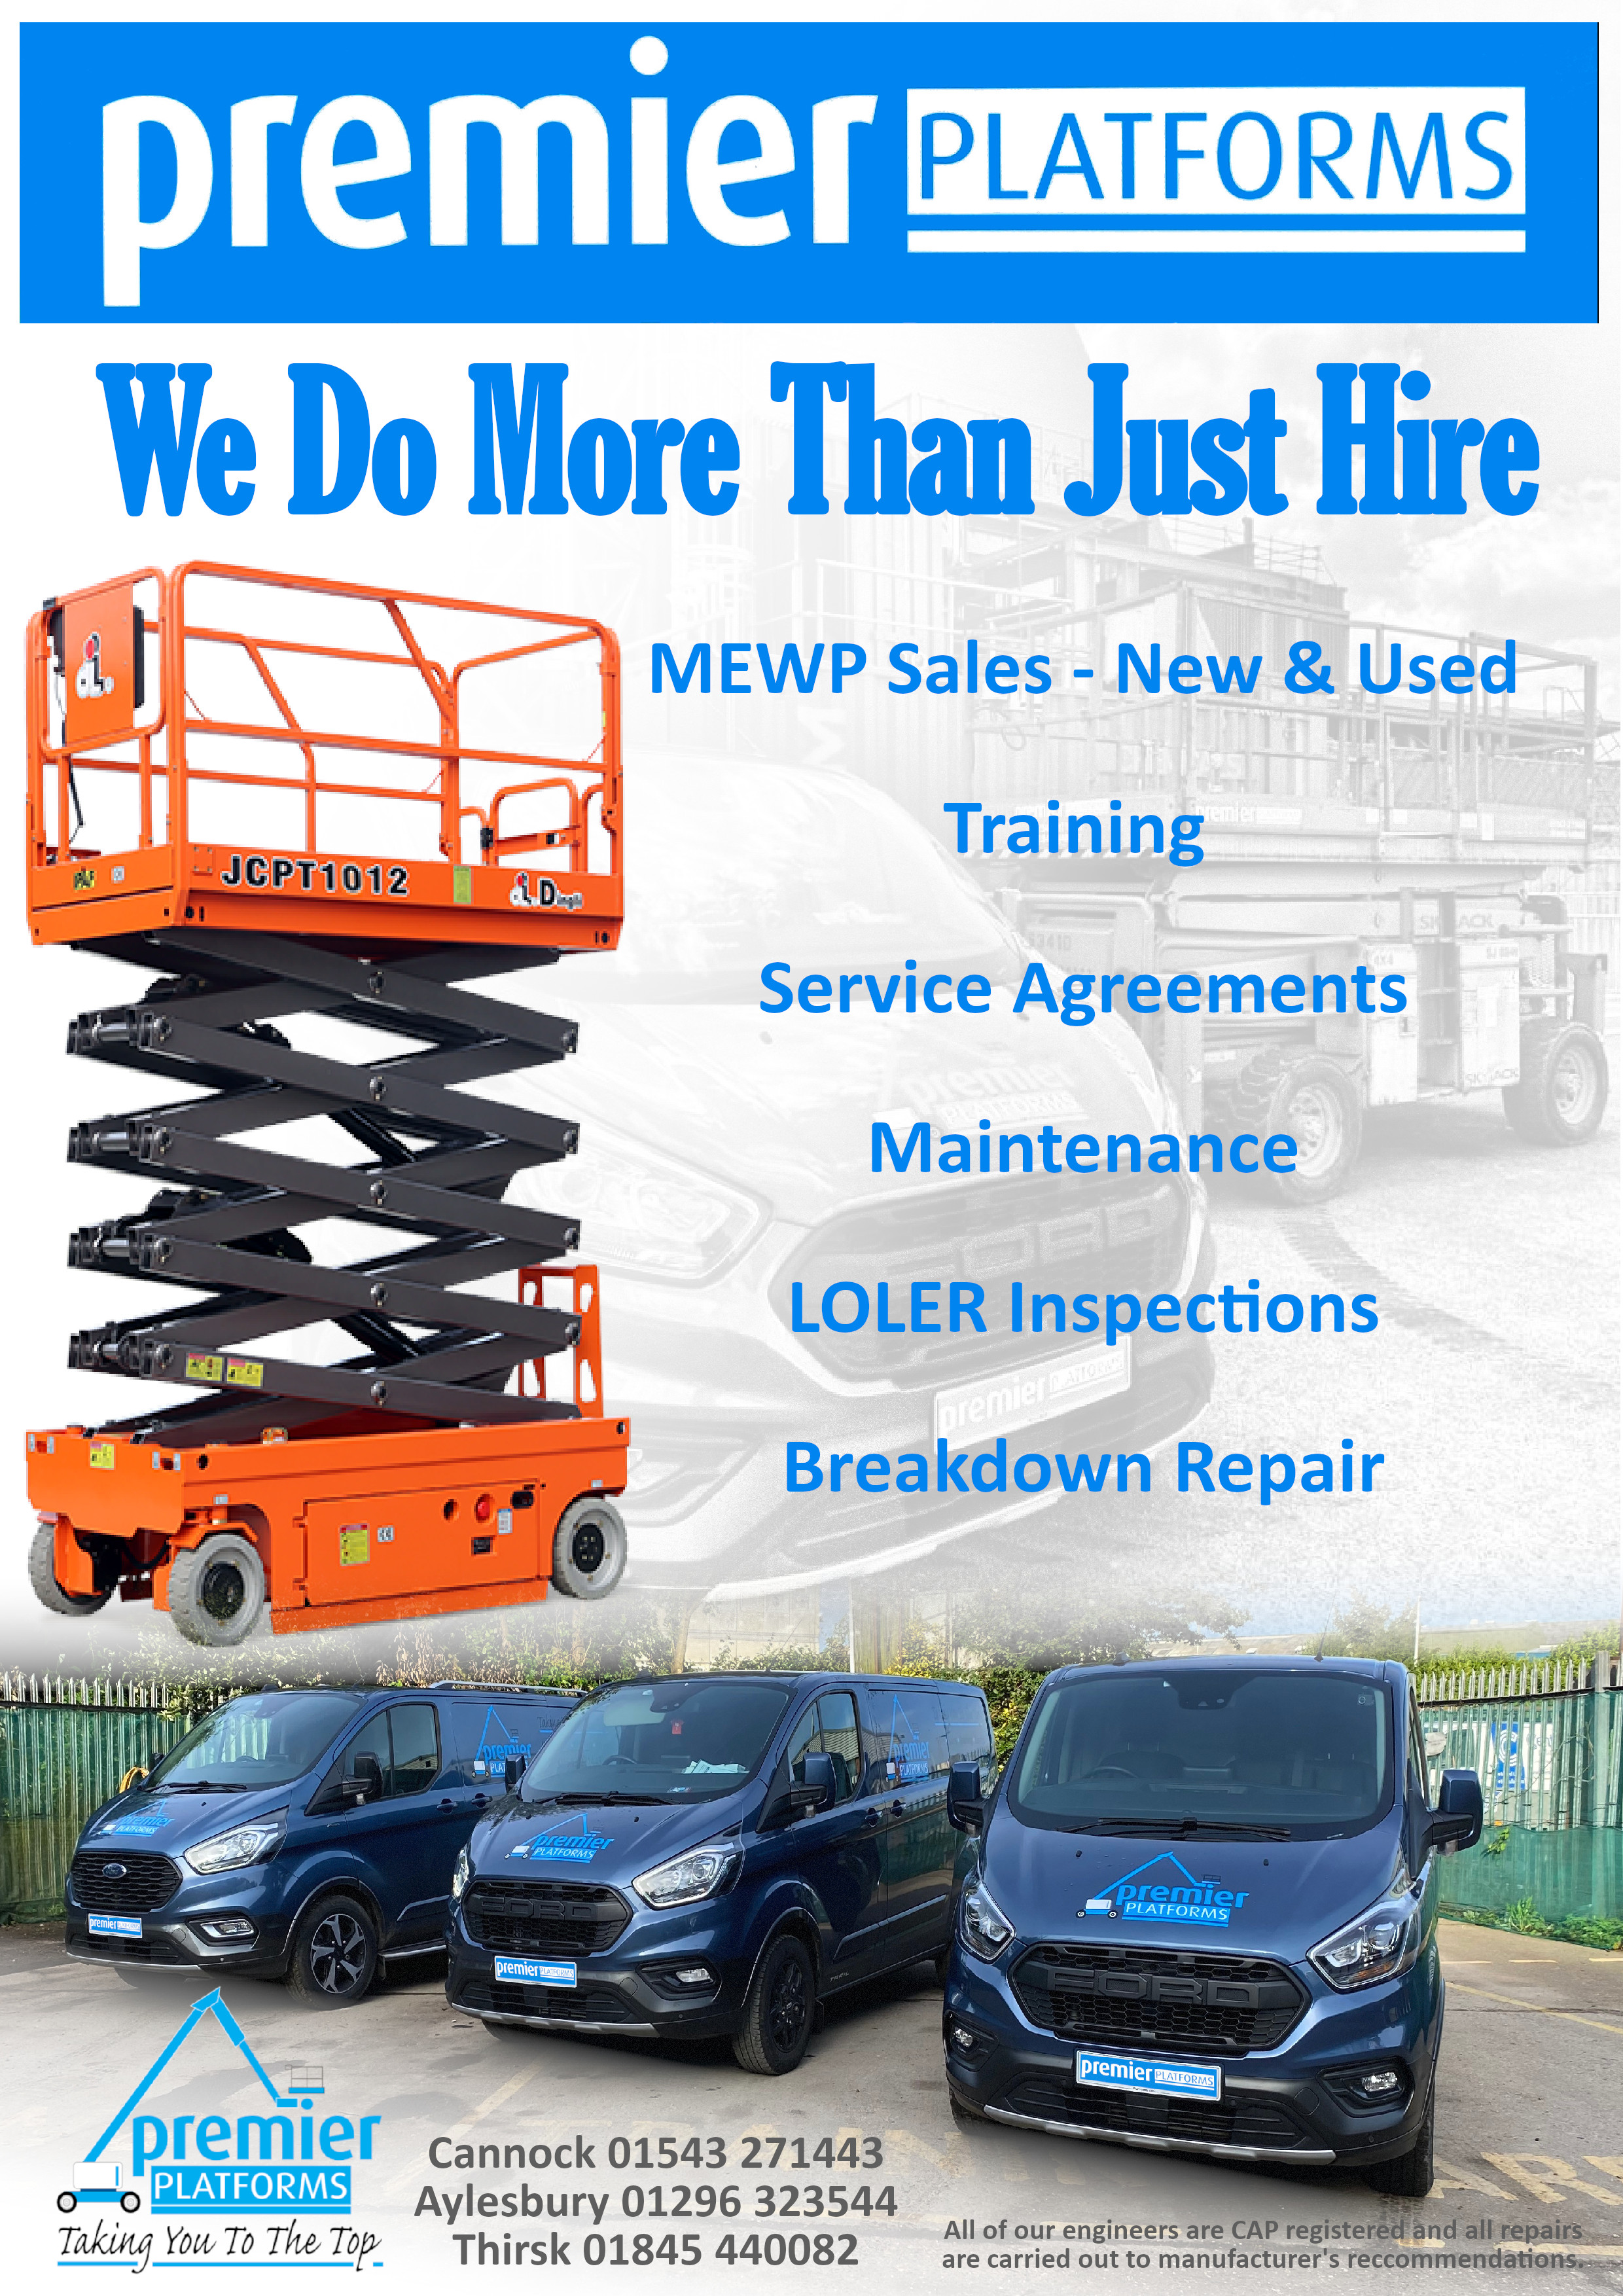 LOLER Maintenance Services In Staffordshire